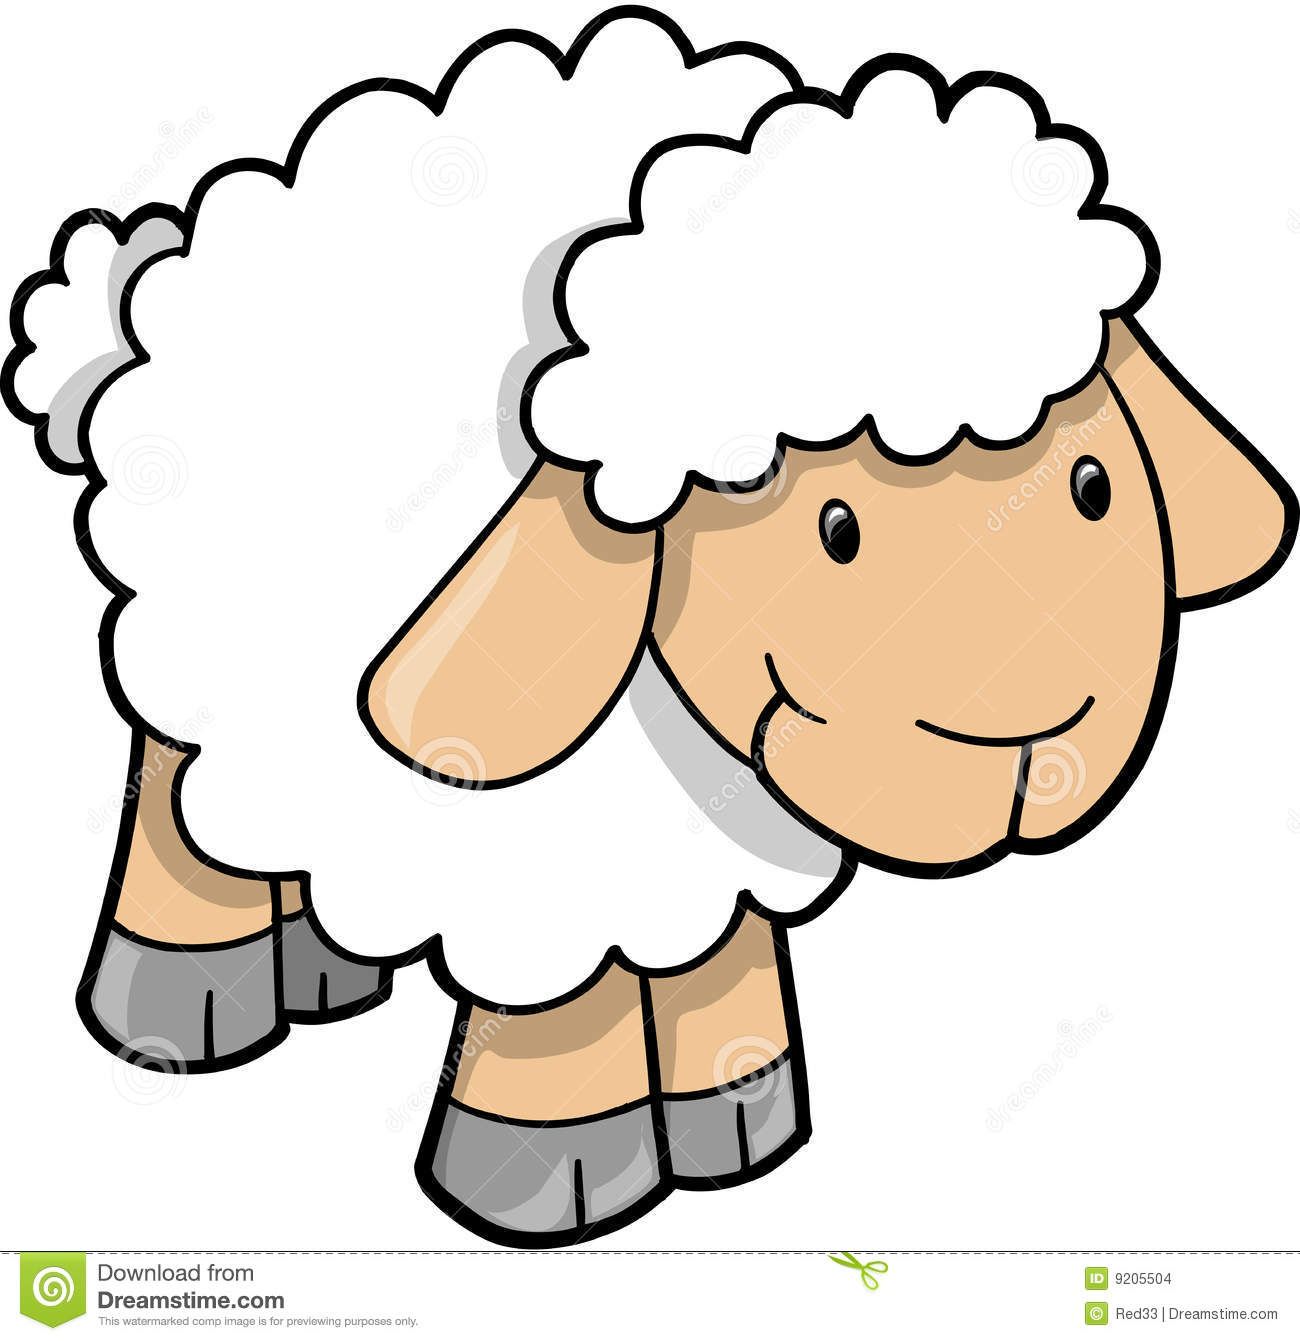 Cute sheep images.